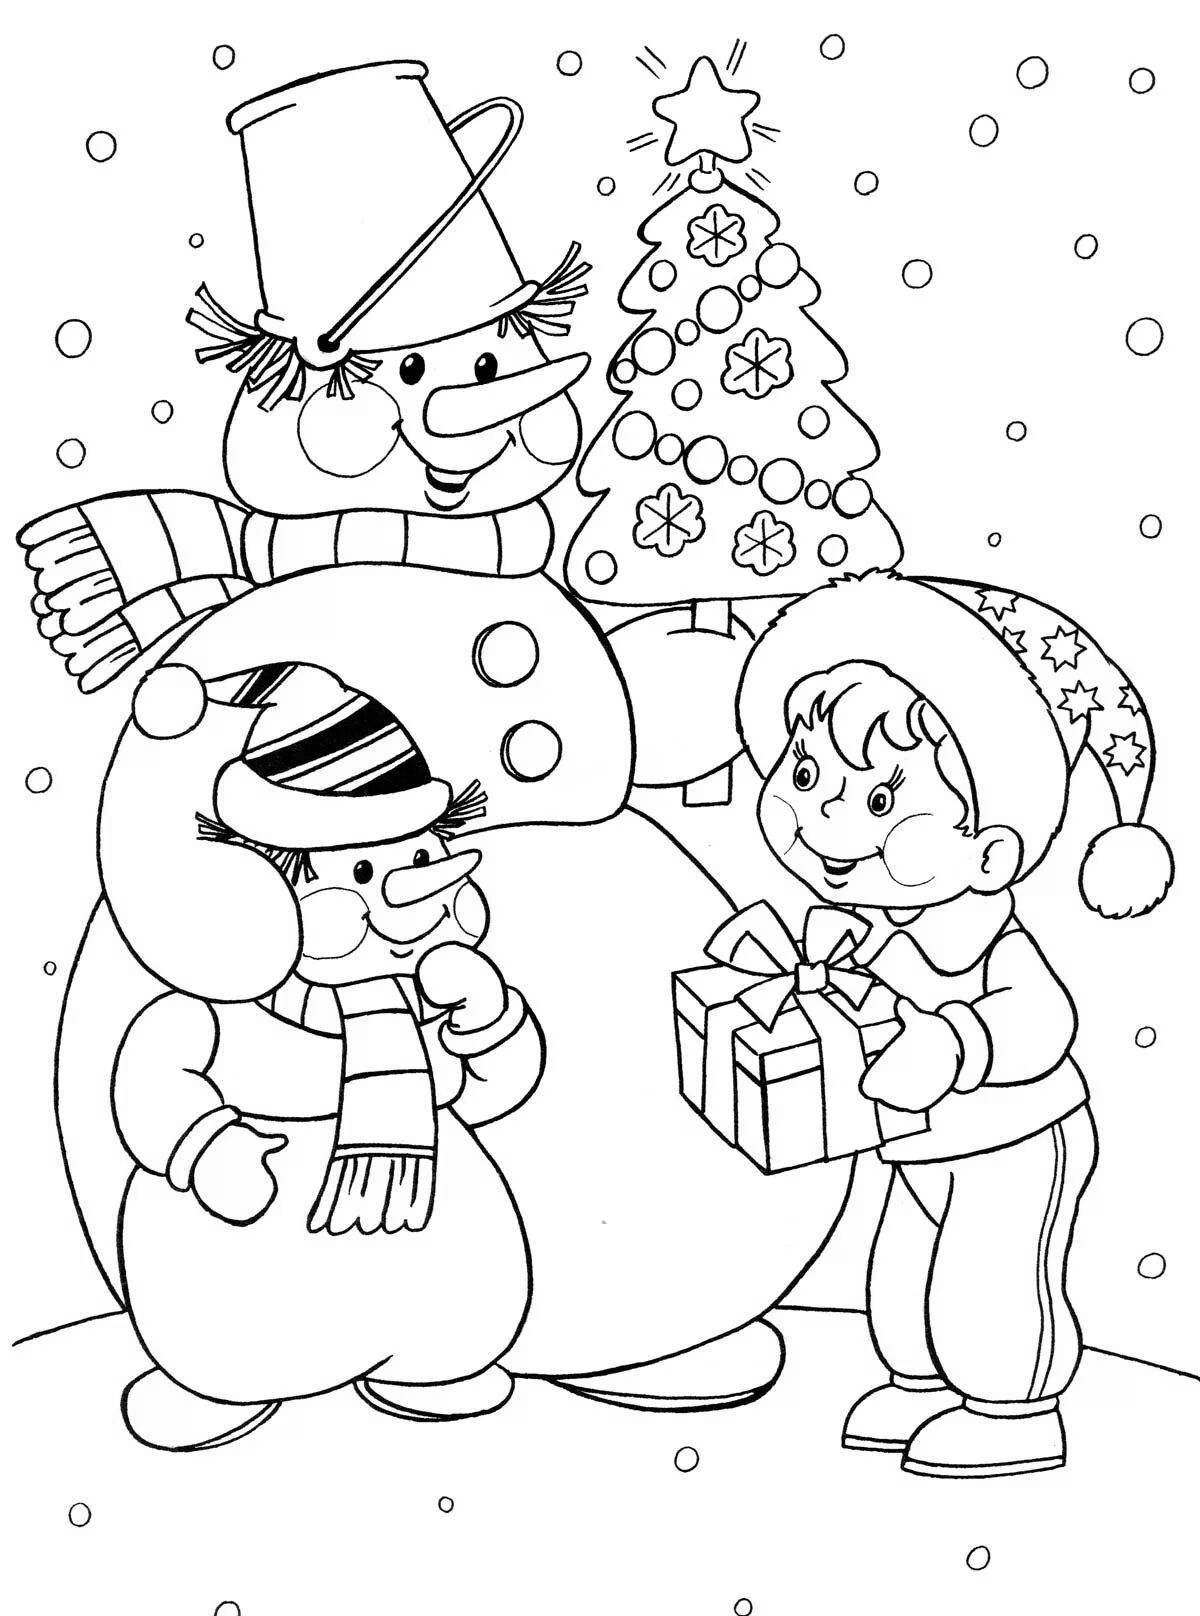 Sweet Christmas coloring book